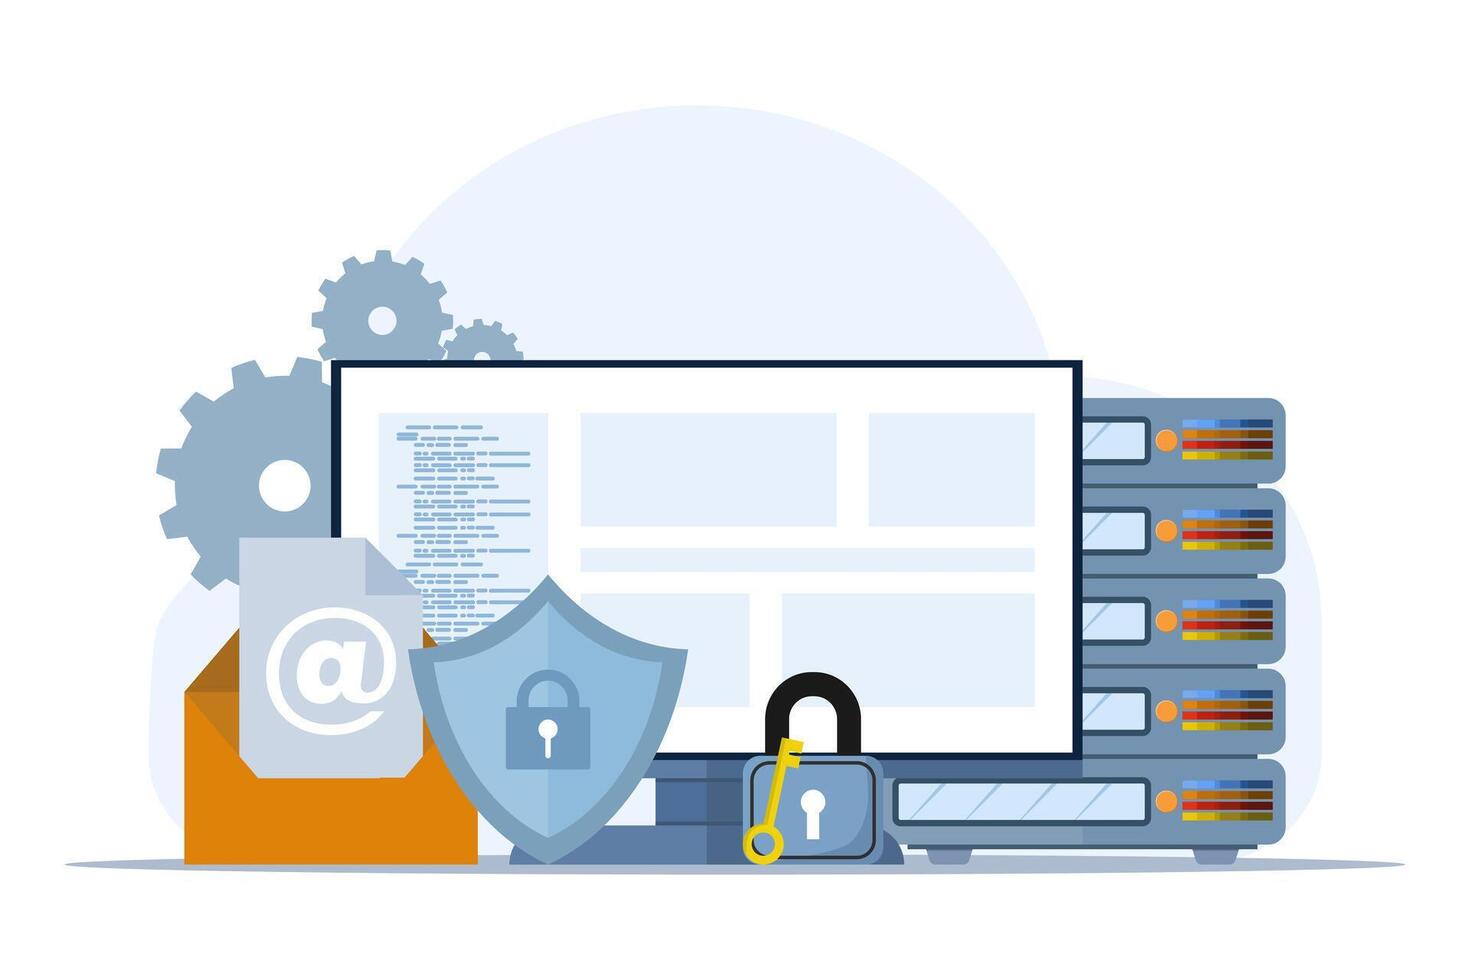 database security concept, phishing, hacker attack, hackers stealing personal data, using Cyber Security Services to Protect Personal Data. Database security, vector flat design illustration.